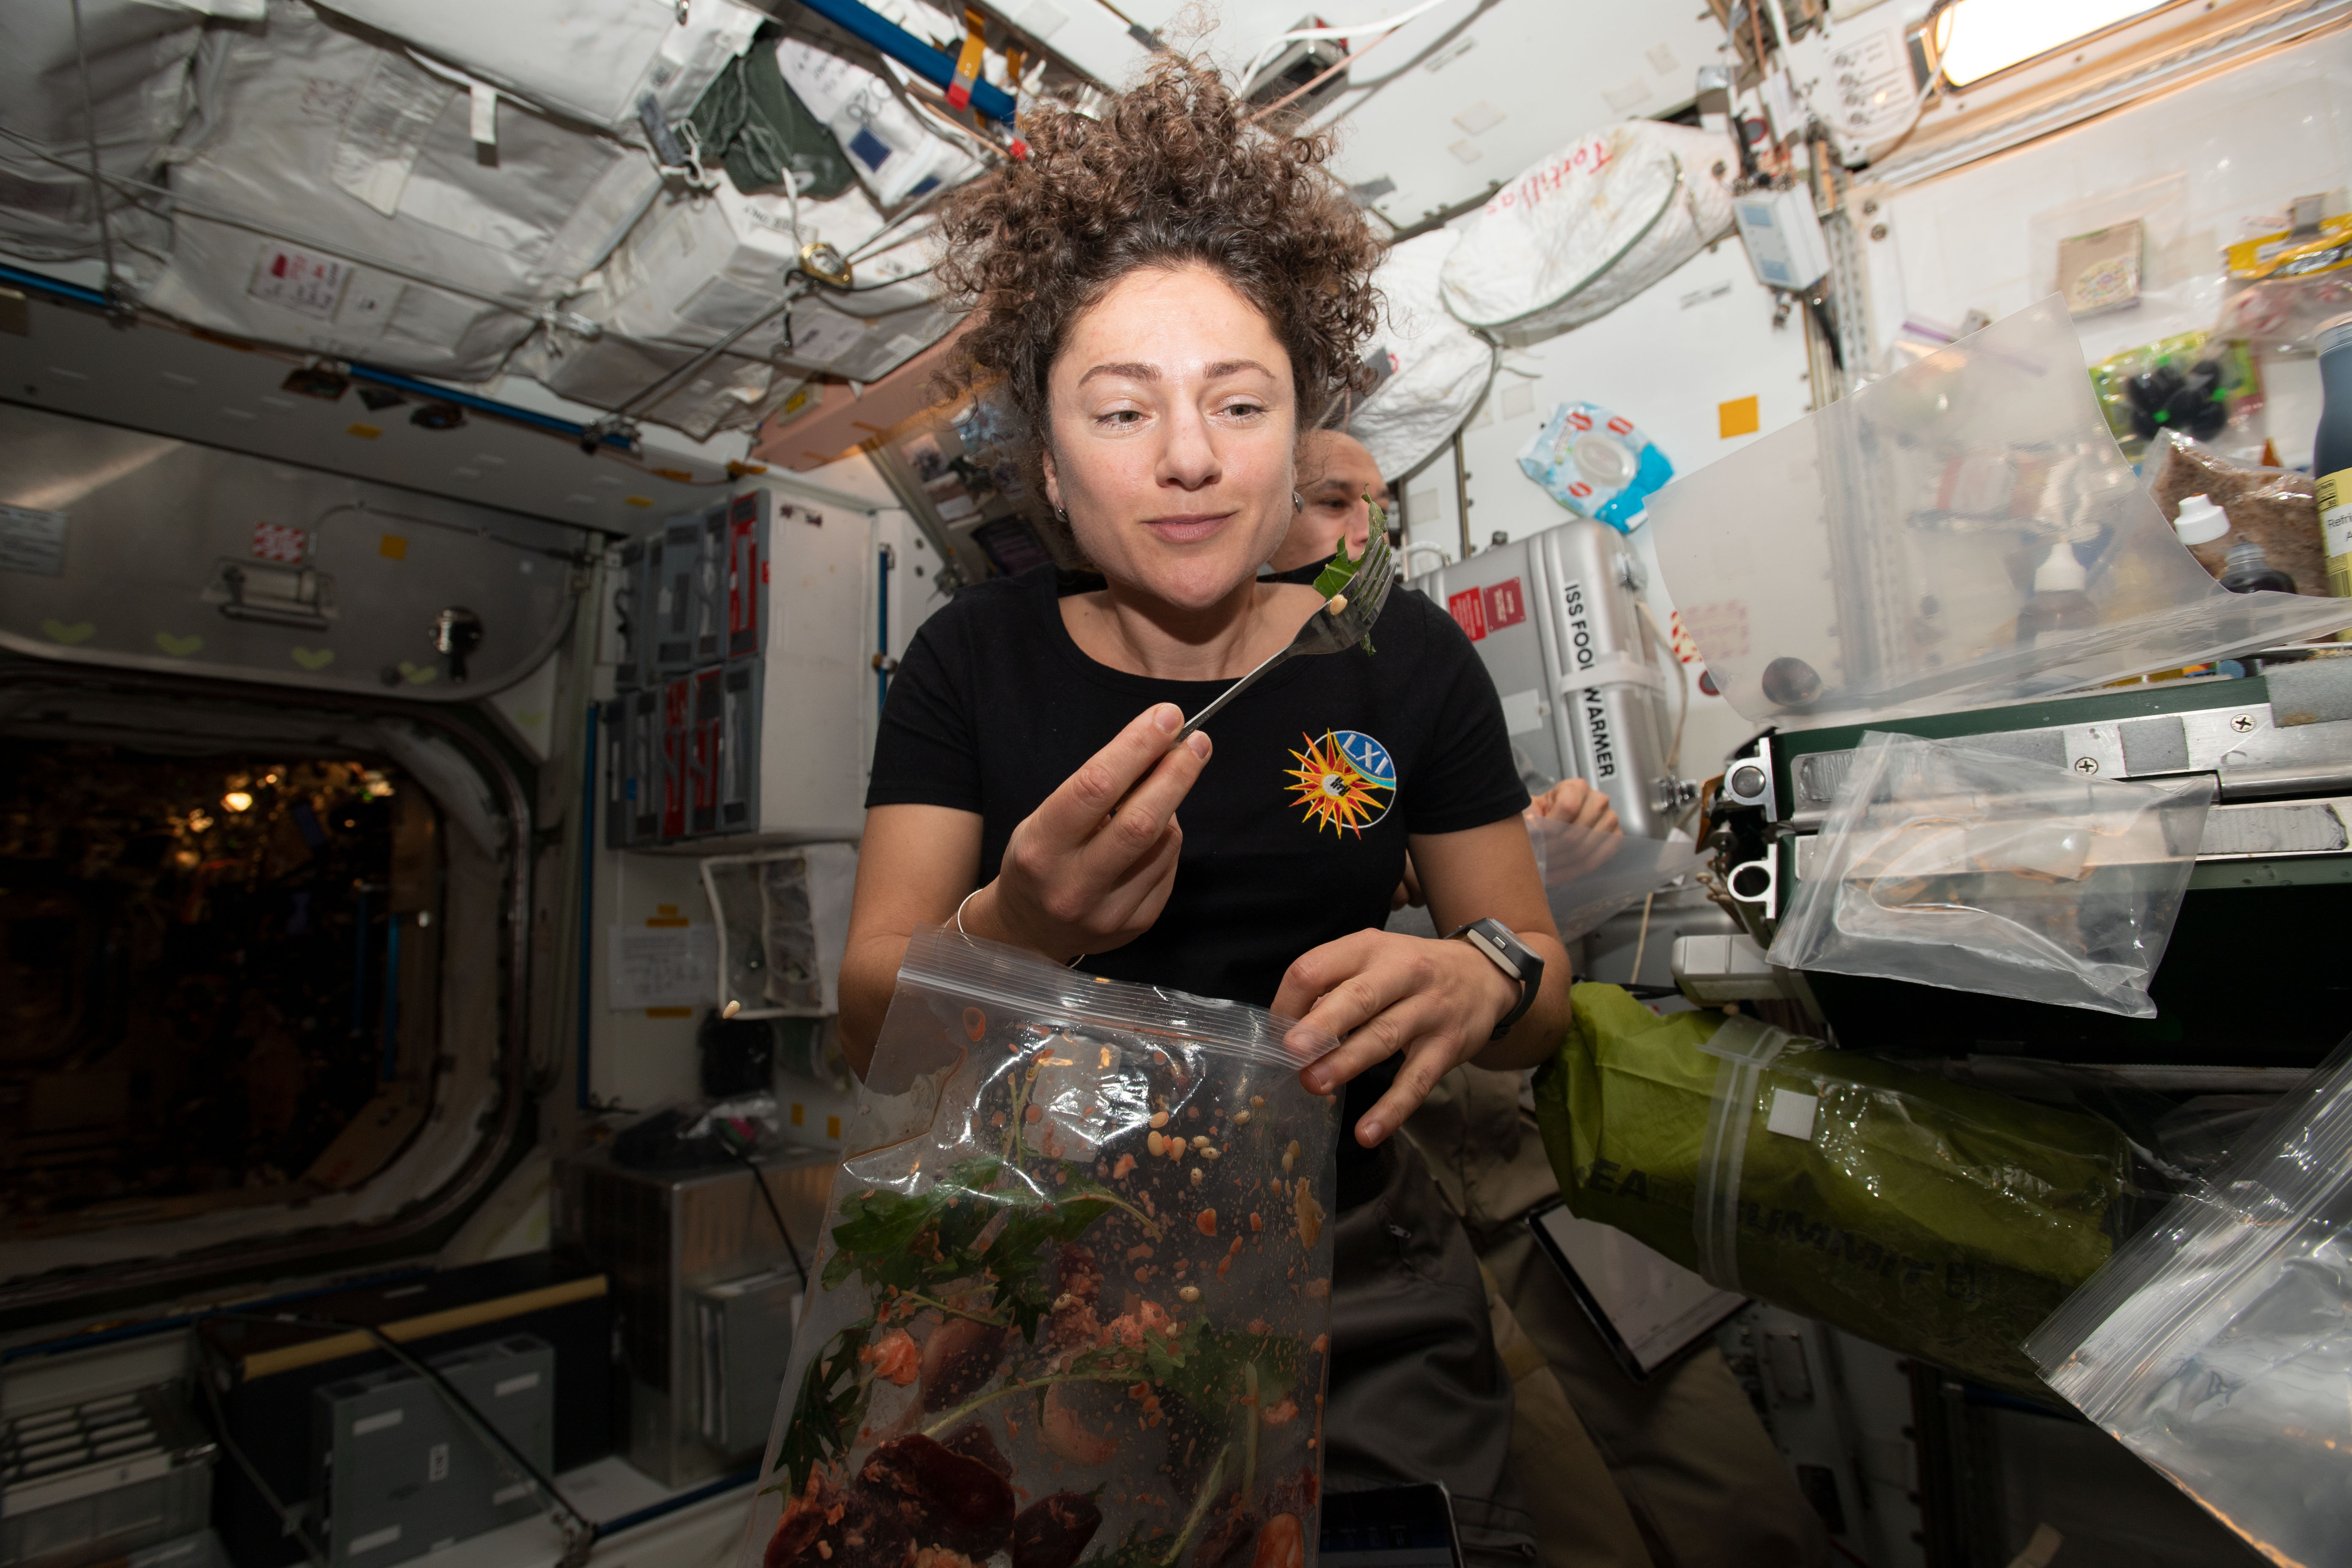 Houston We Have a Podcast: Ep. 275: Mars Ep. 6: Eat Like a Martian NASA astronaut Jessica Meir dines on fresh Mizuna mustard greens she harvested earlier that day aboard the International Space Station